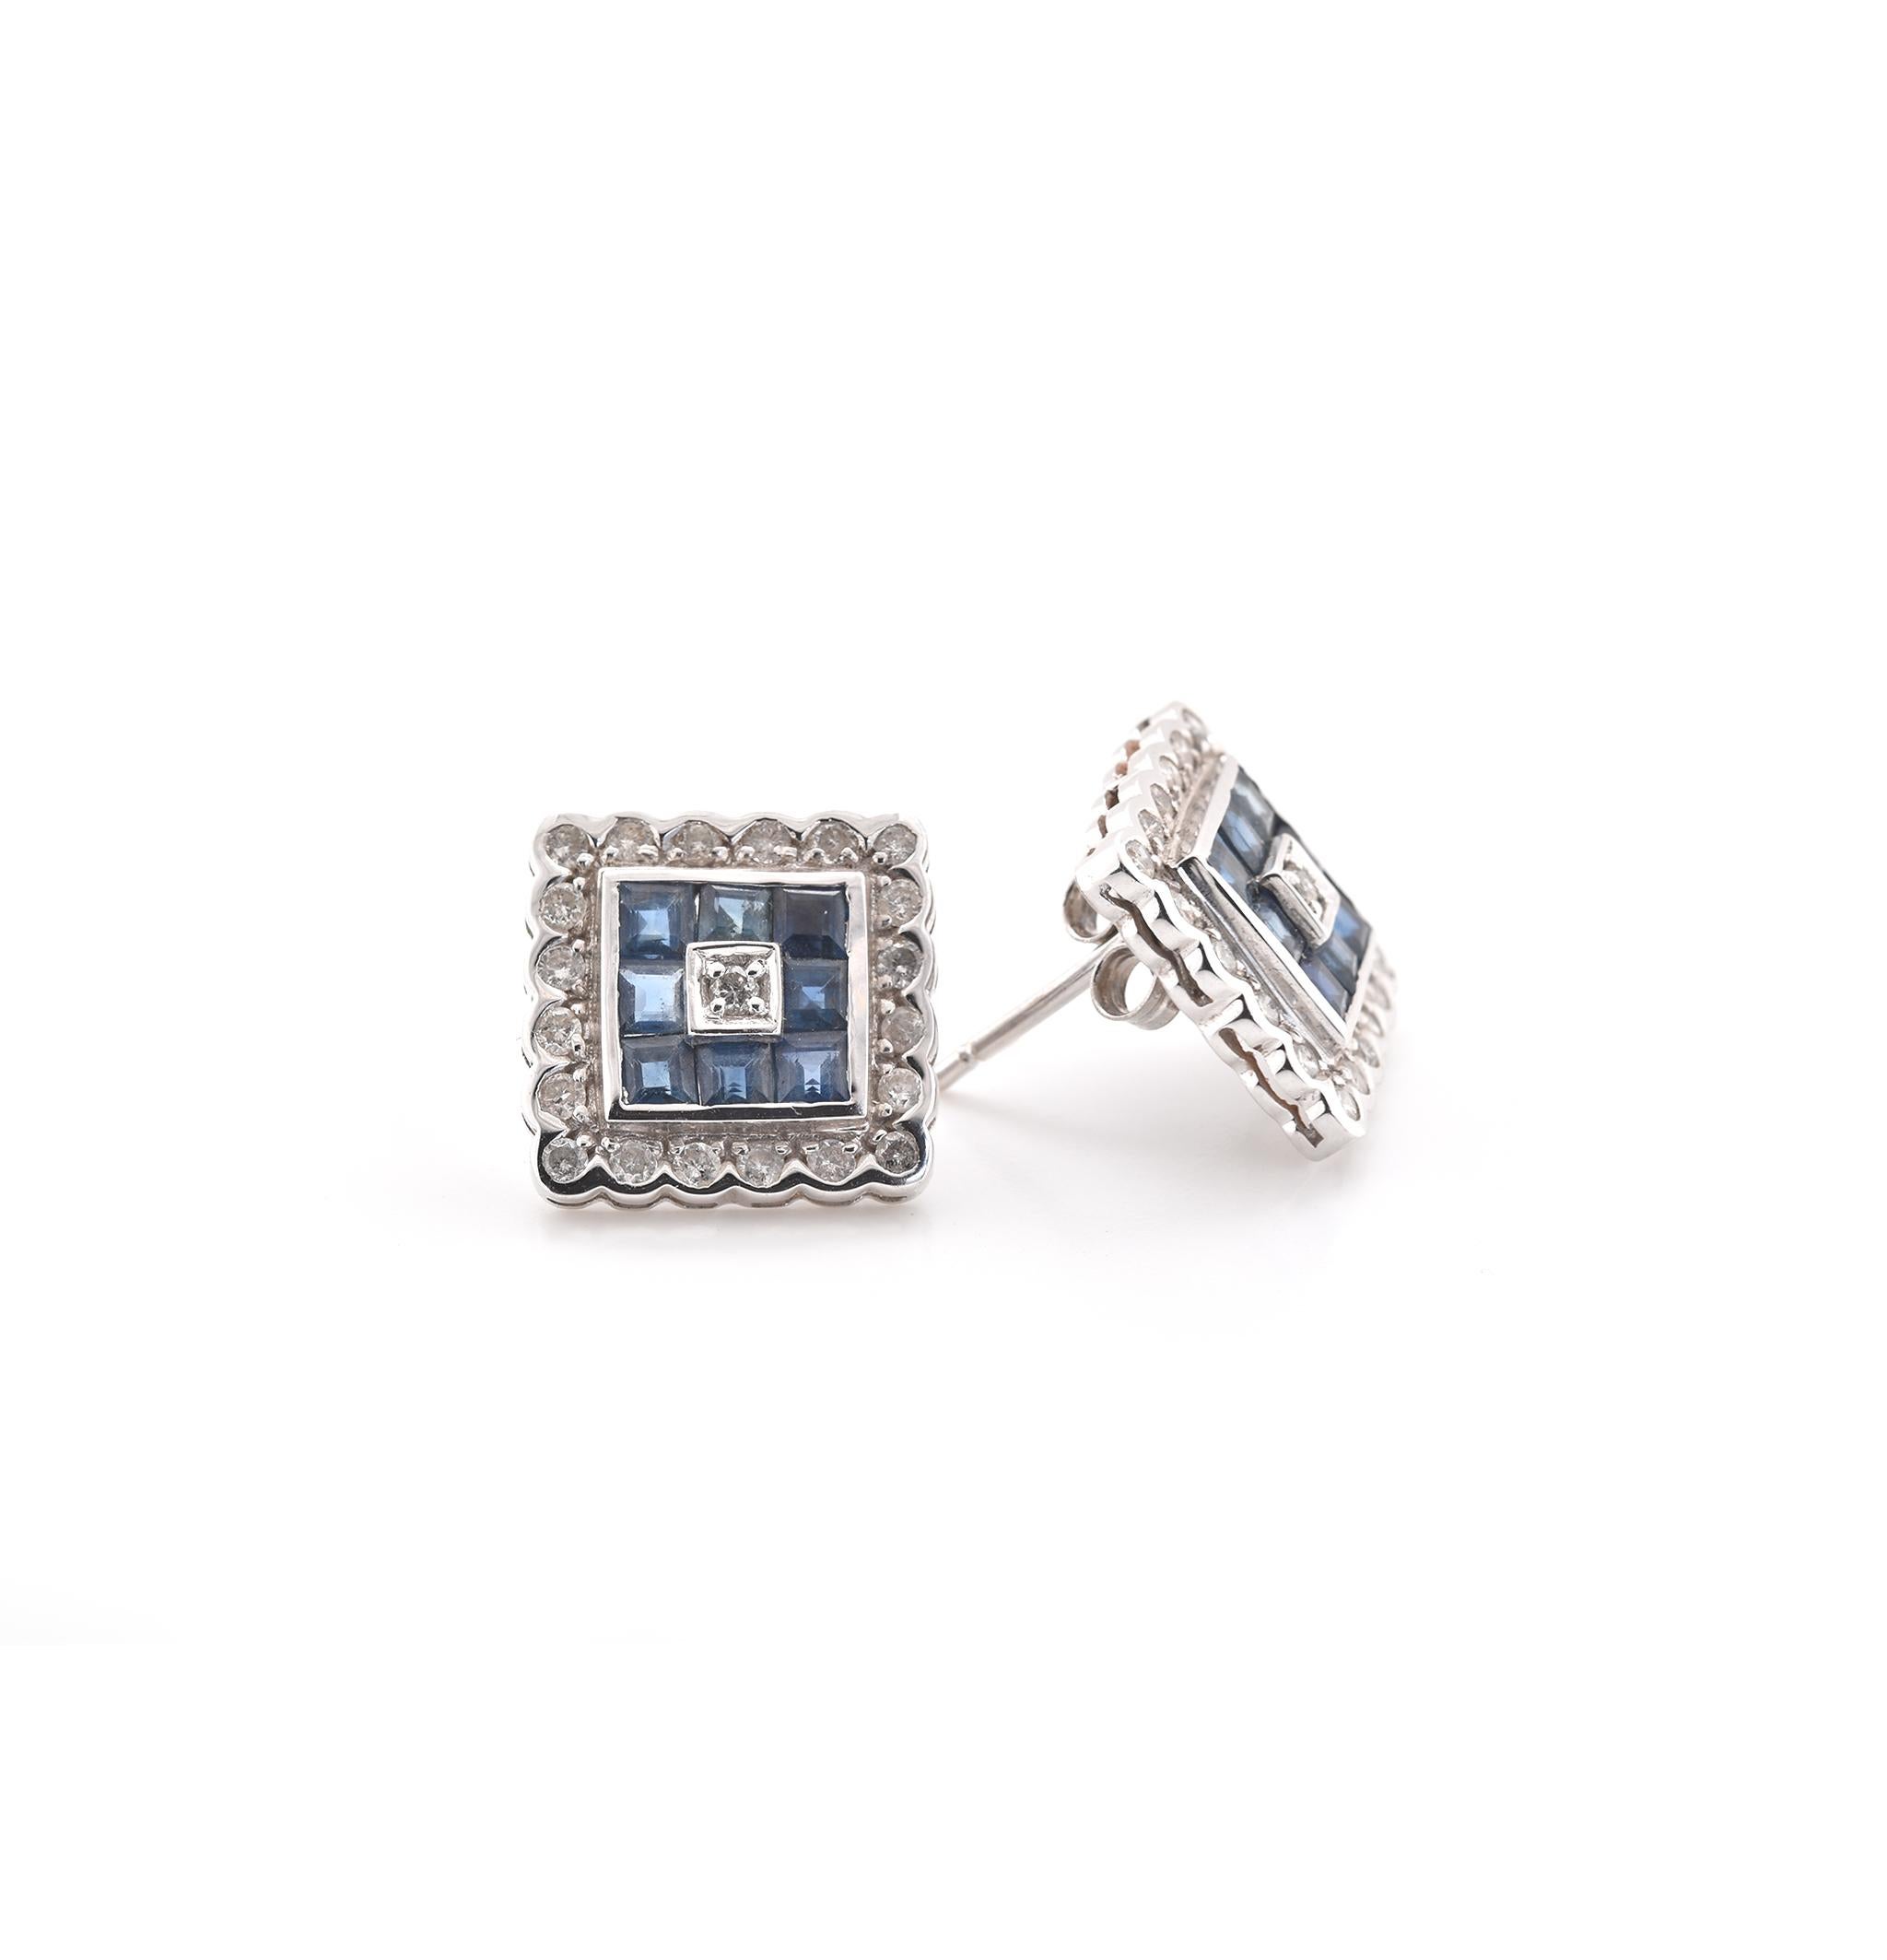 Designer: custom
Material: 14k white gold
Sapphire: 16 princess cut sapphires
Diamonds: 40 round brilliant cuts = 0.50cttw
Dimensions: earrings measure 12.85mm x 13.05mm
Fastenings: post width friction back
Weight: 4.38 grams
